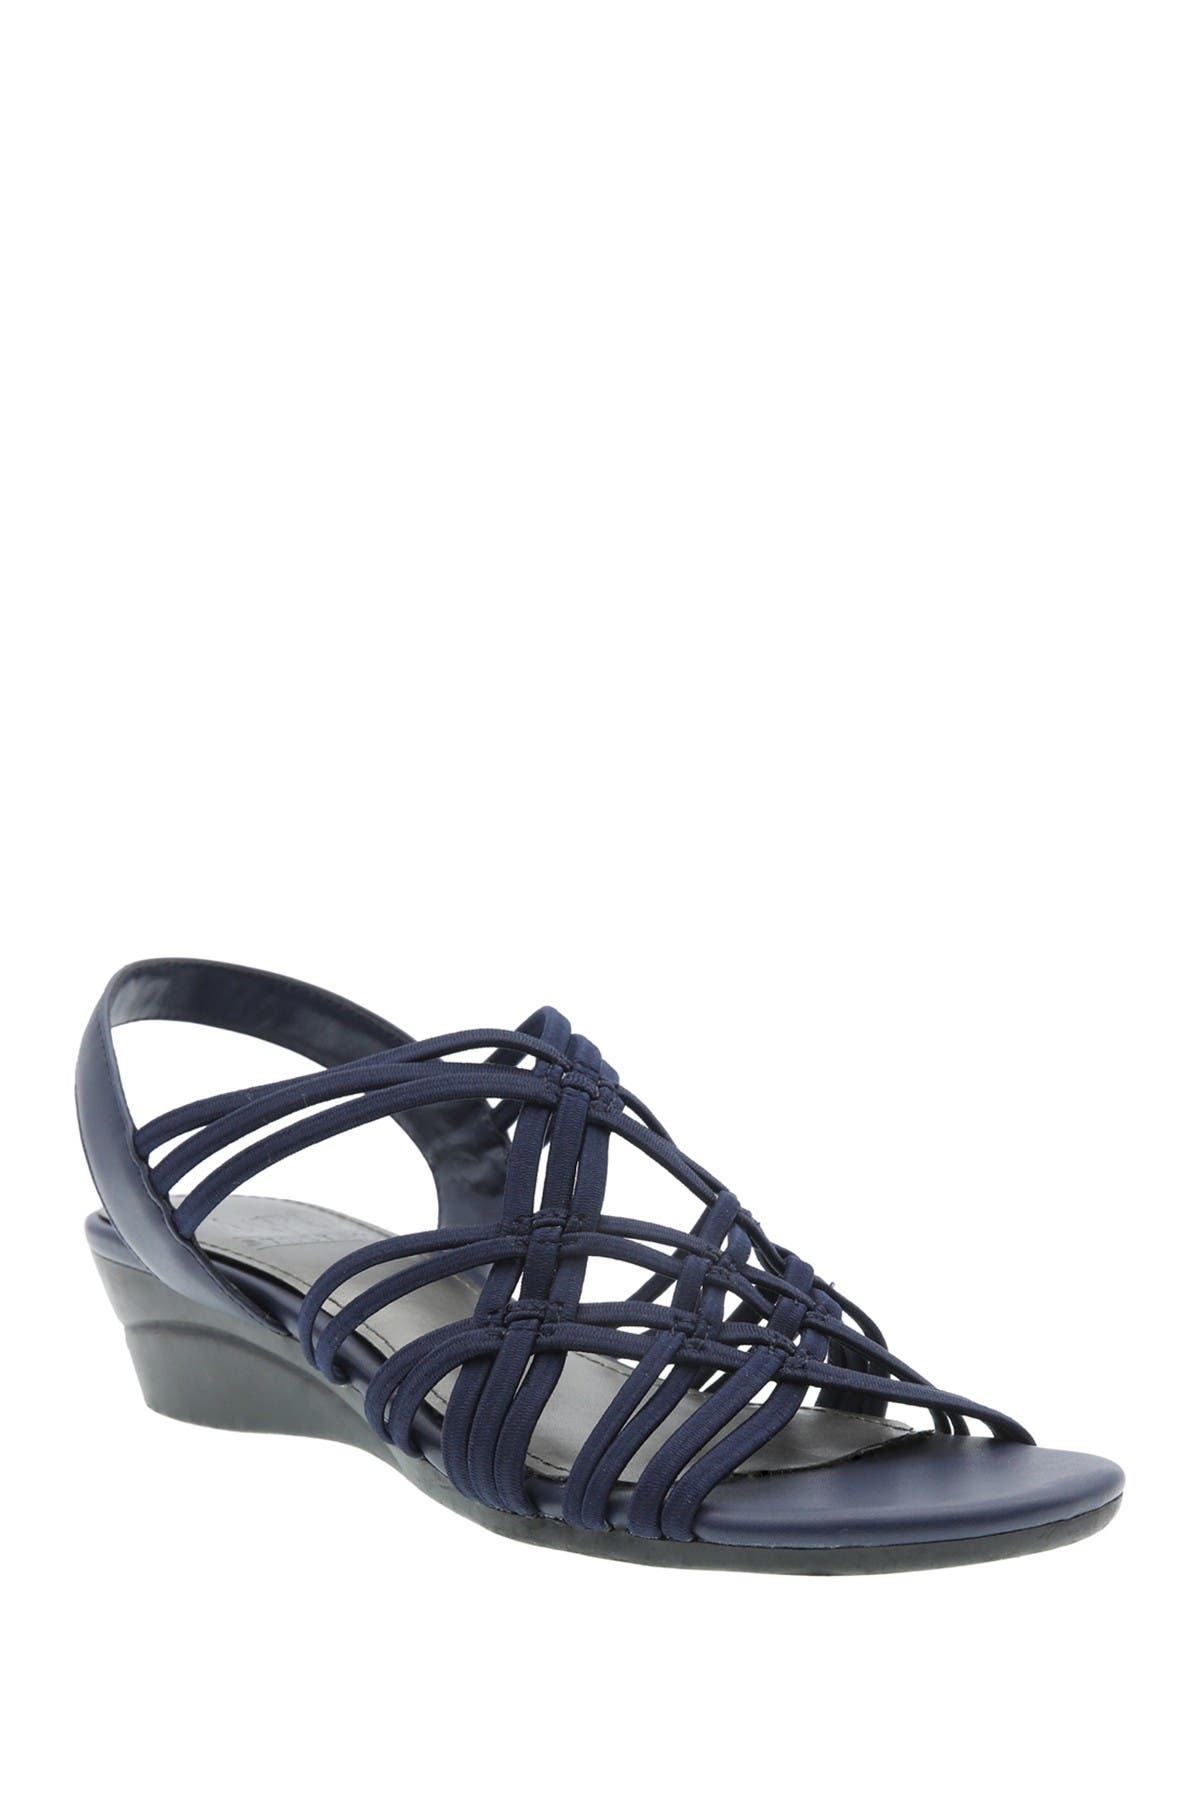 Impo Rainelle Stretch Wedge Sandal In Navy